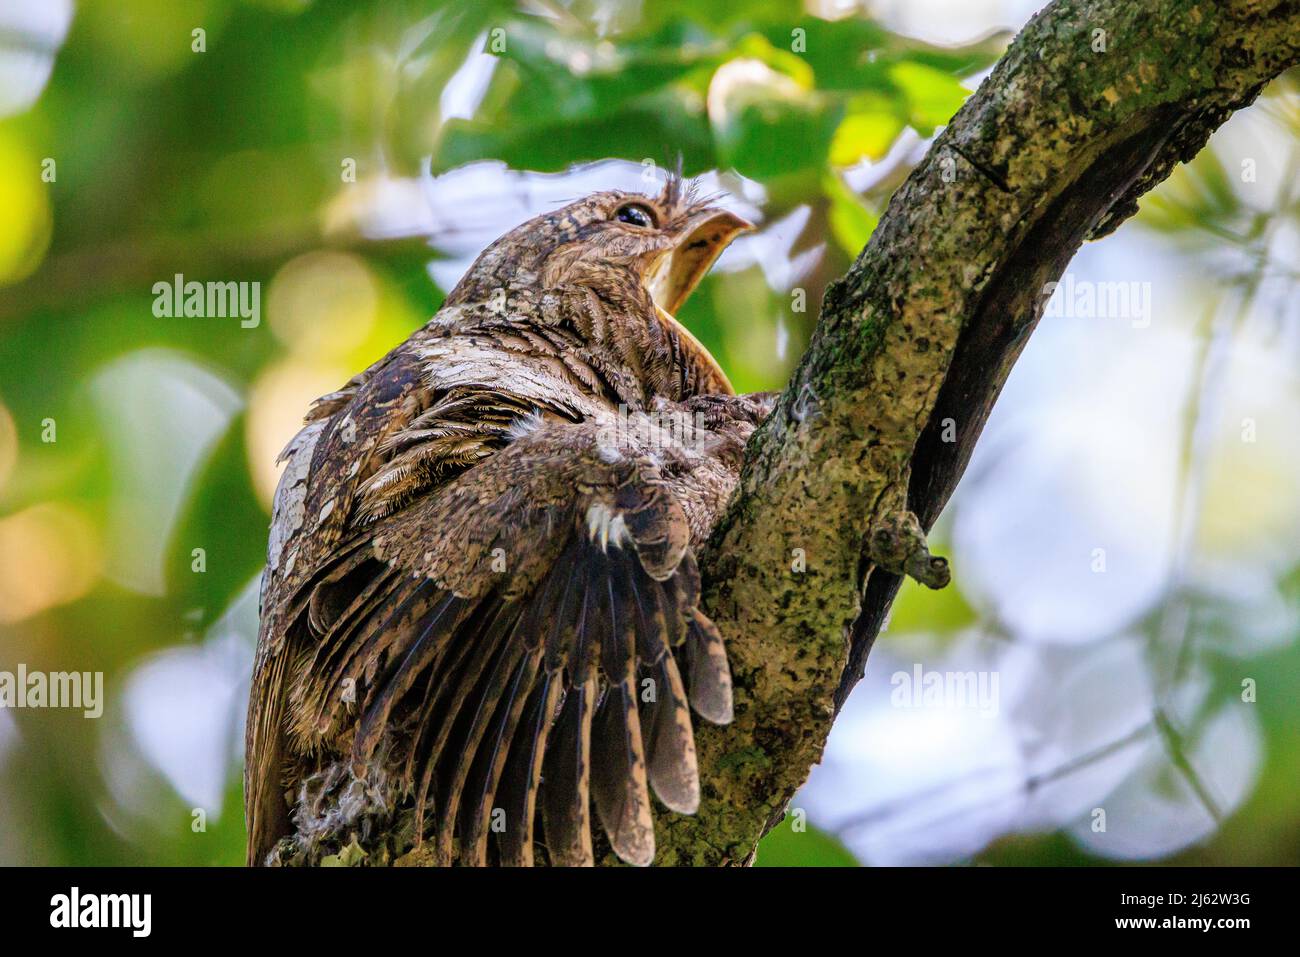 adult male sri lanka frogmouth with mouth wide open, sitting on nest with chick. Chick has wing outstretched. Stock Photo